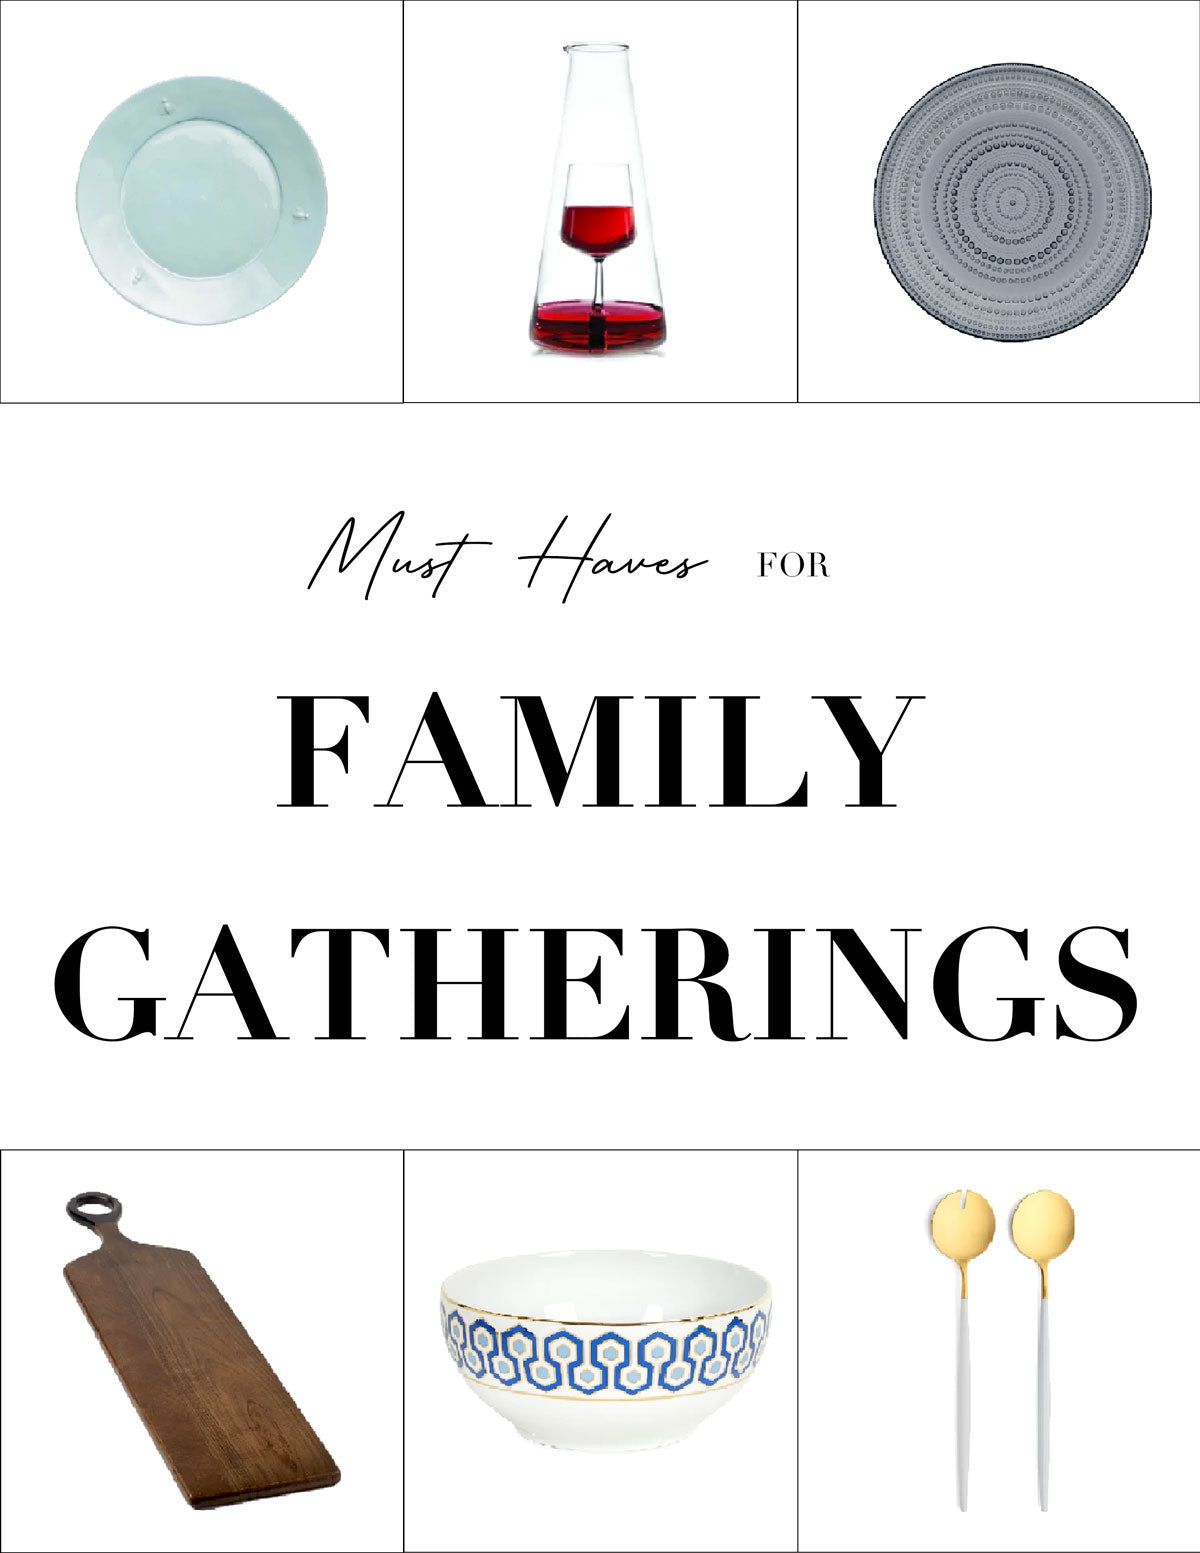 Essential Table-Top Items for Family Gatherings (PART 1)